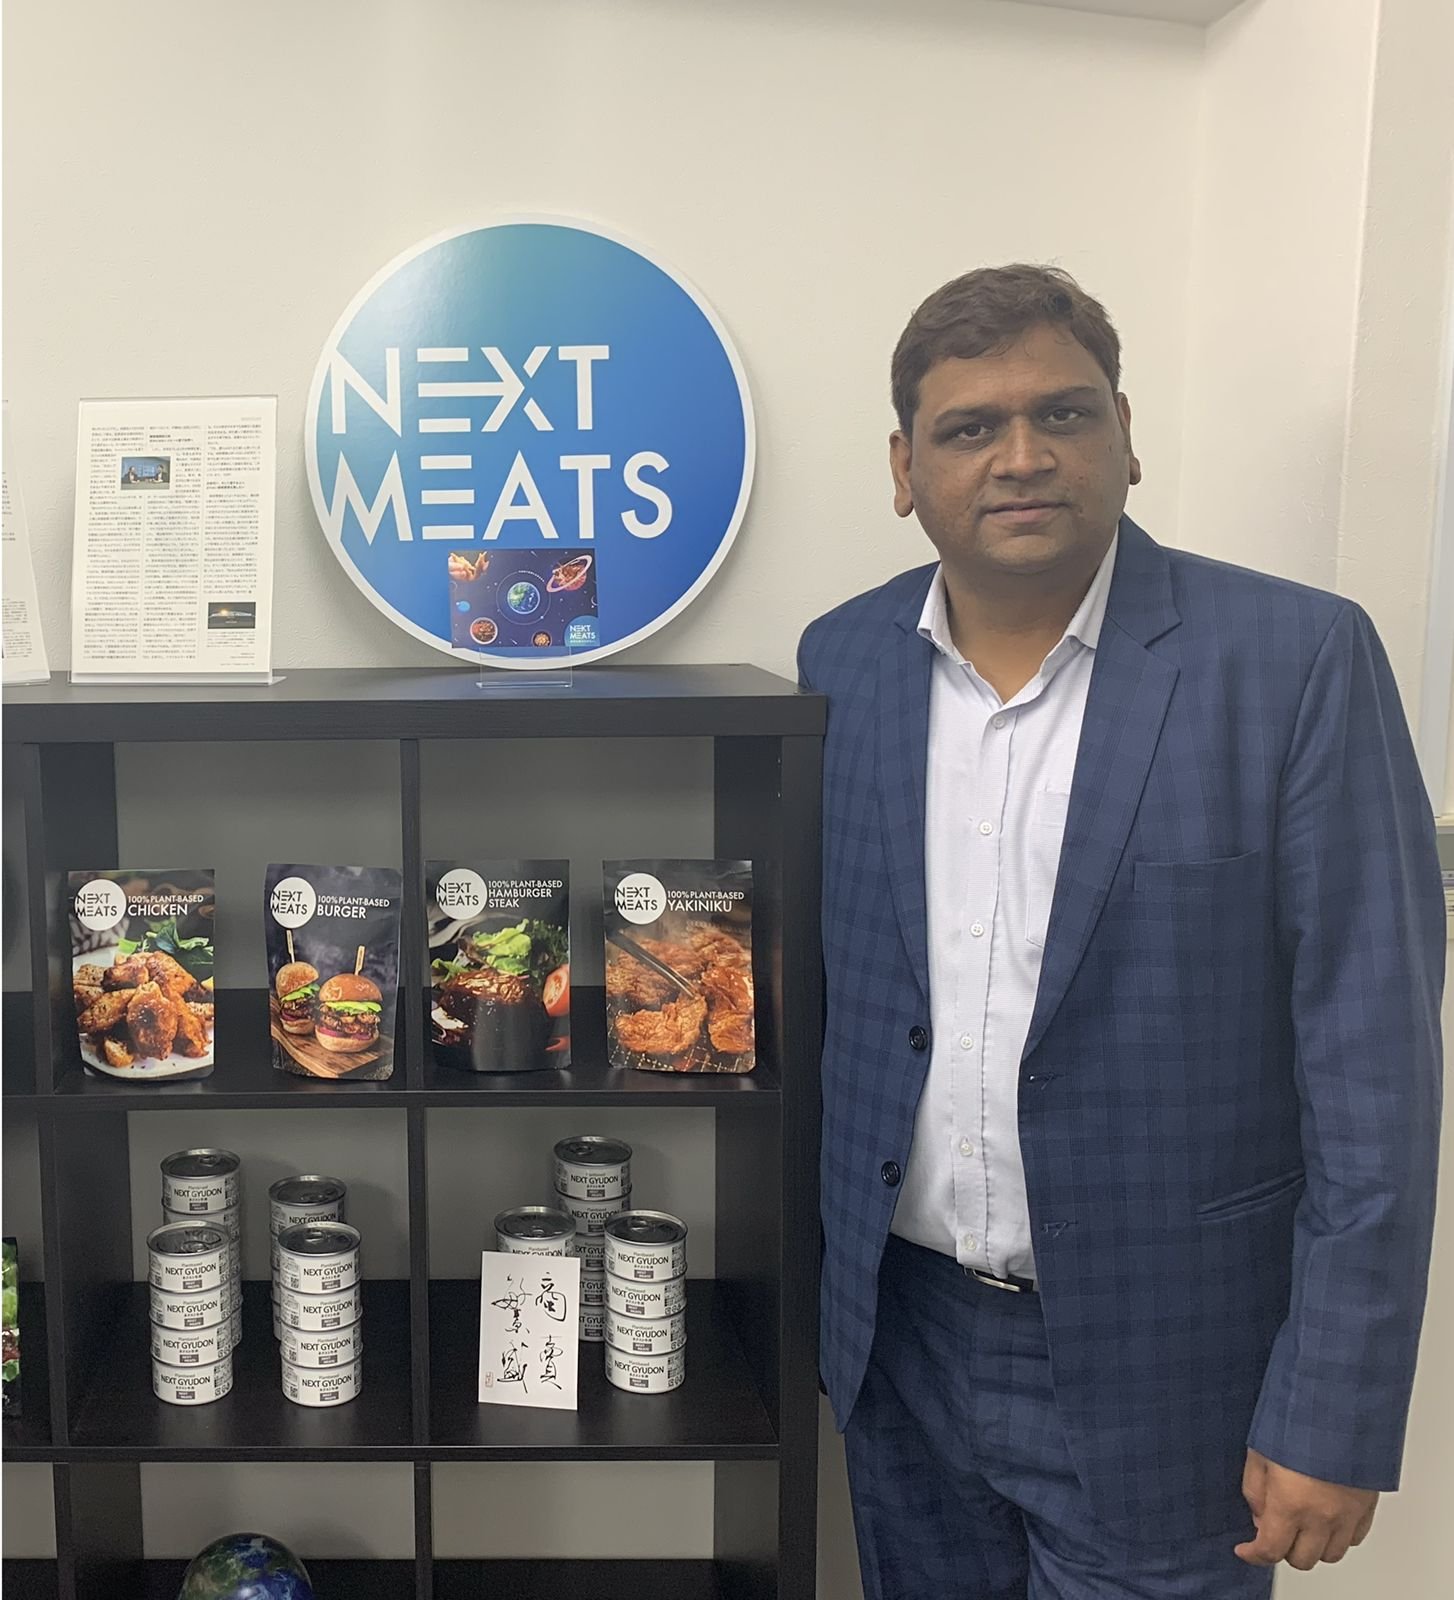 “Next Meats’ plant-based products will hit the shelves in Delhi NCR and Bangalore by March”